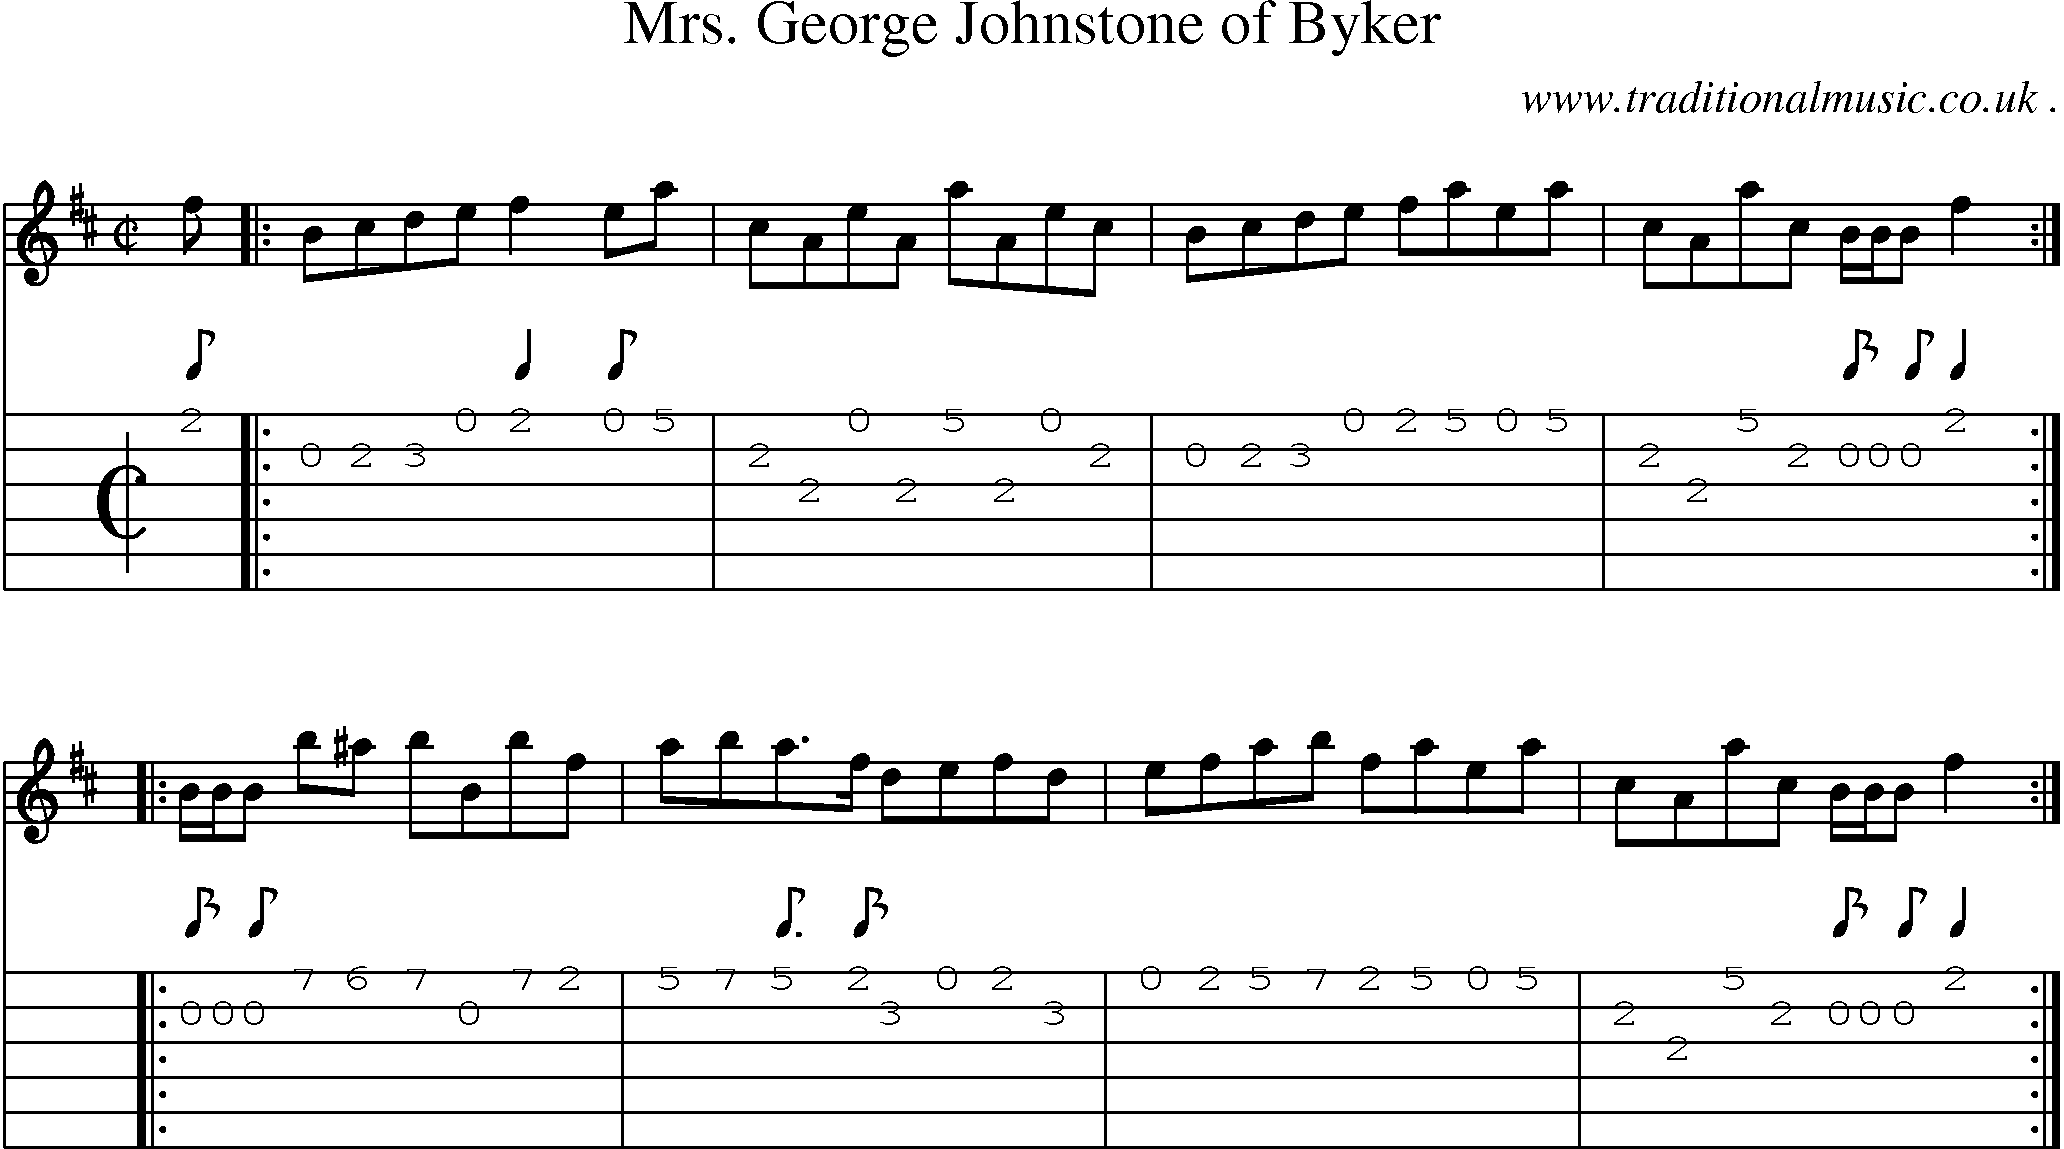 Sheet-music  score, Chords and Guitar Tabs for Mrs George Johnstone Of Byker